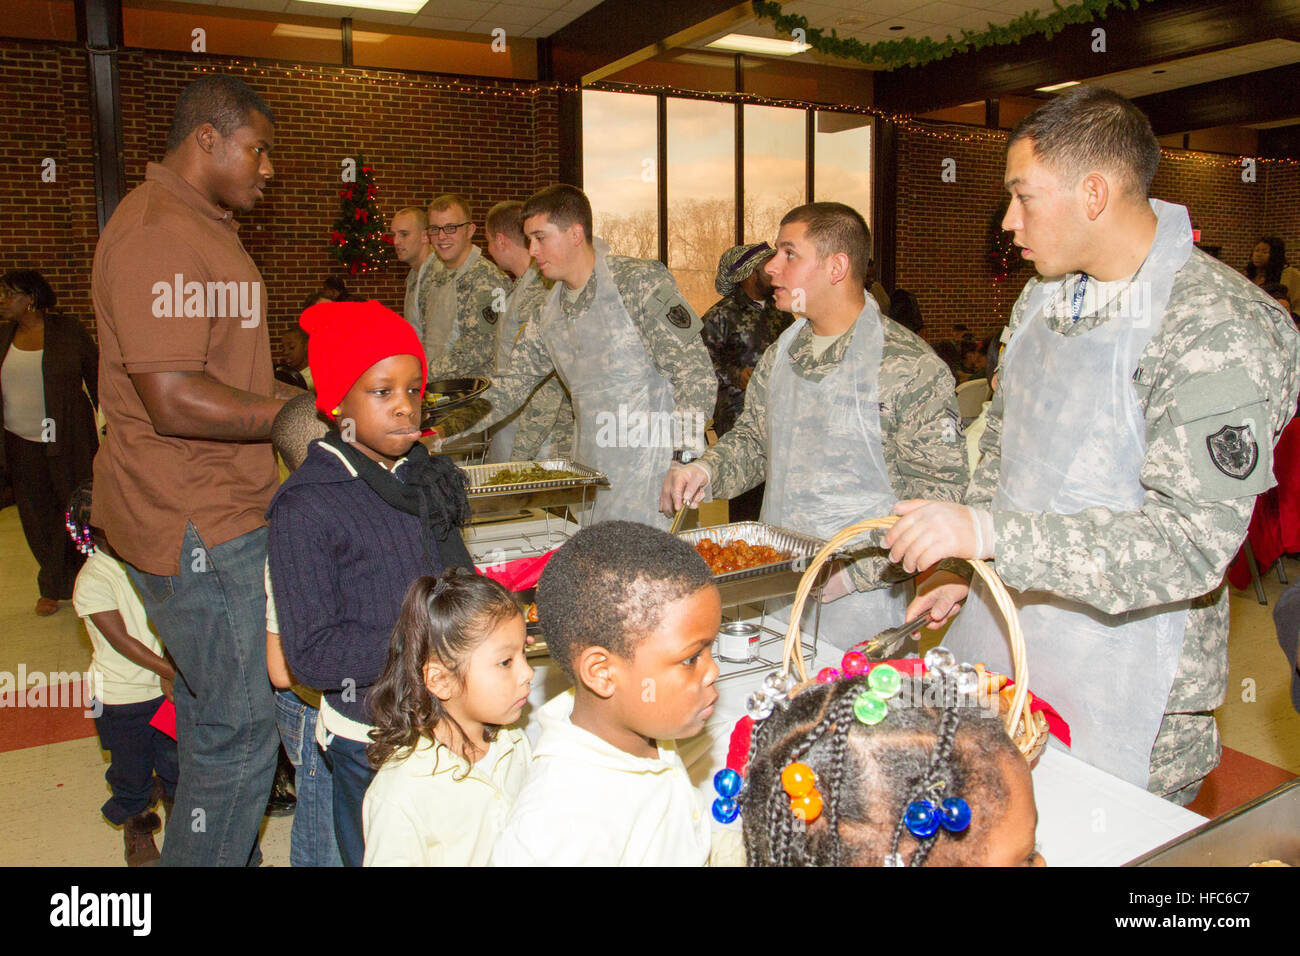 Military and civilian personnel and their families, living or working at Joint Base Anacostia-Bolling volunteered and helped make the Christmas holiday season more joyful for nearly 300 youth in the District of Columbia's Ward 8 at a Disadvantaged Youth Holiday Party, sponsored by the Metropolitan Police Department's Seventh District Dec. 18. The JBAB volunteers helped serve food to the children; pass out gifts and help with the distribution of 80 bicycles donated to the Marine Corps Foundation's Toys for Tots program for the neediest of the children. The JBAB-based U.S. Air Force Rock Band, M Stock Photo